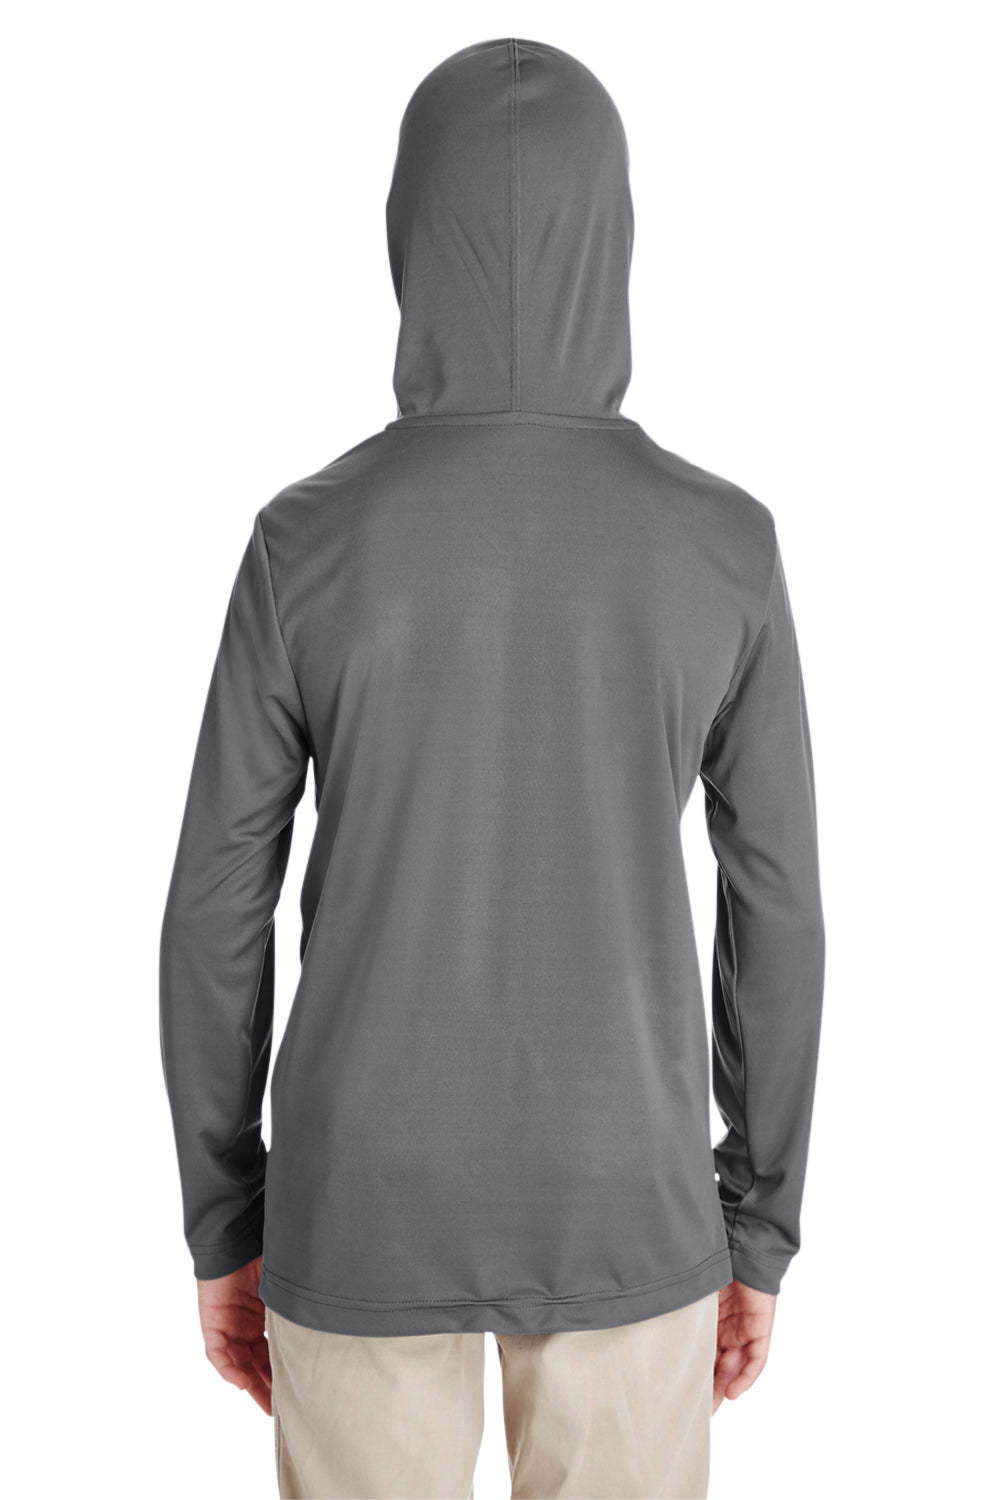 Team 365 TT41Y Youth Zone Performance Moisture Wicking Long Sleeve Hooded T-Shirt Hoodie Graphite Grey Back